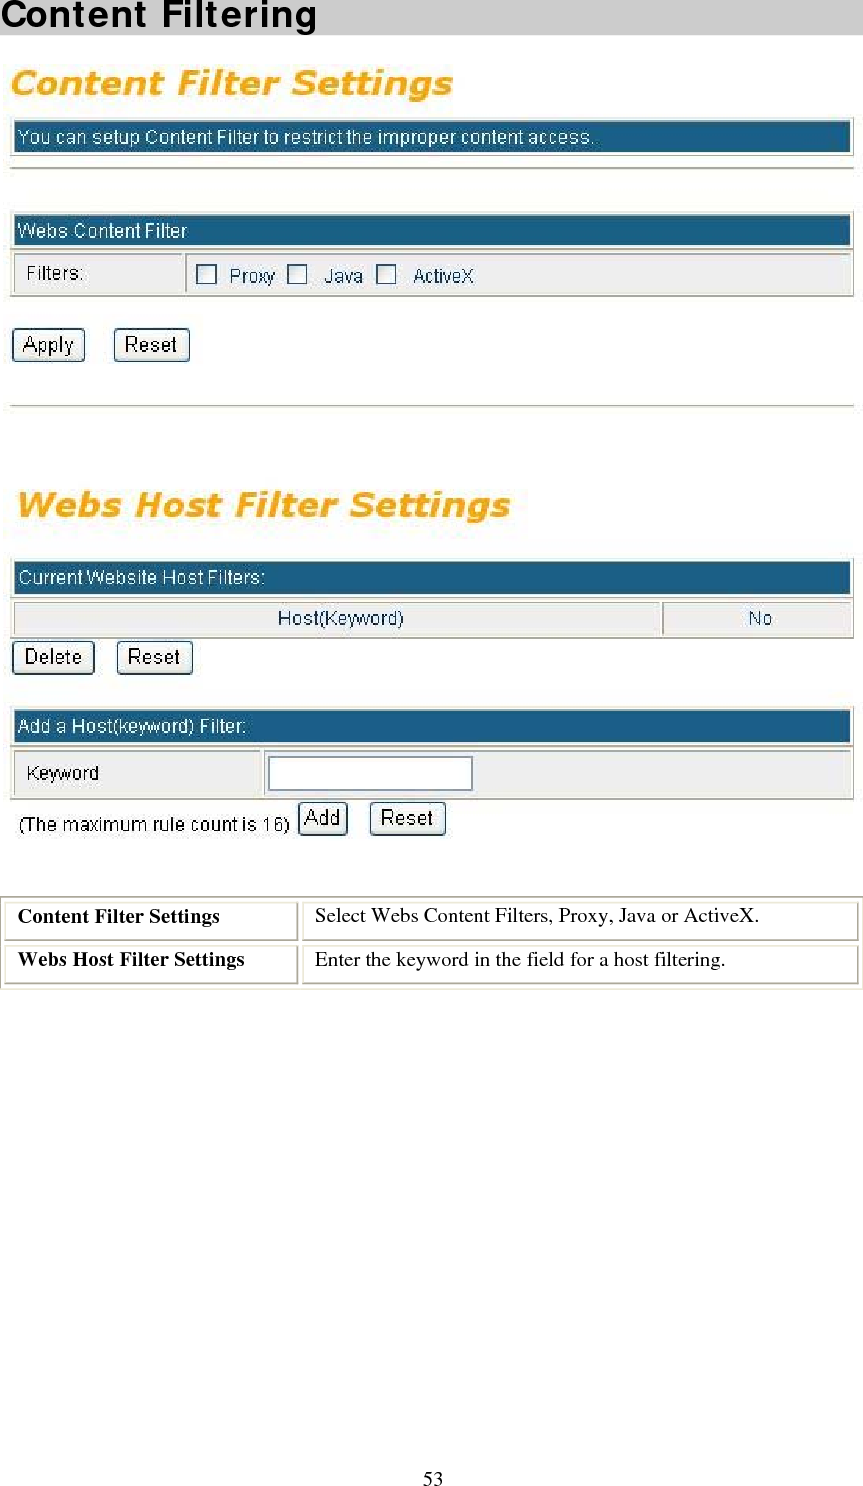   53Content Filtering   Content Filter Settings  Select Webs Content Filters, Proxy, Java or ActiveX. Webs Host Filter Settings  Enter the keyword in the field for a host filtering.  